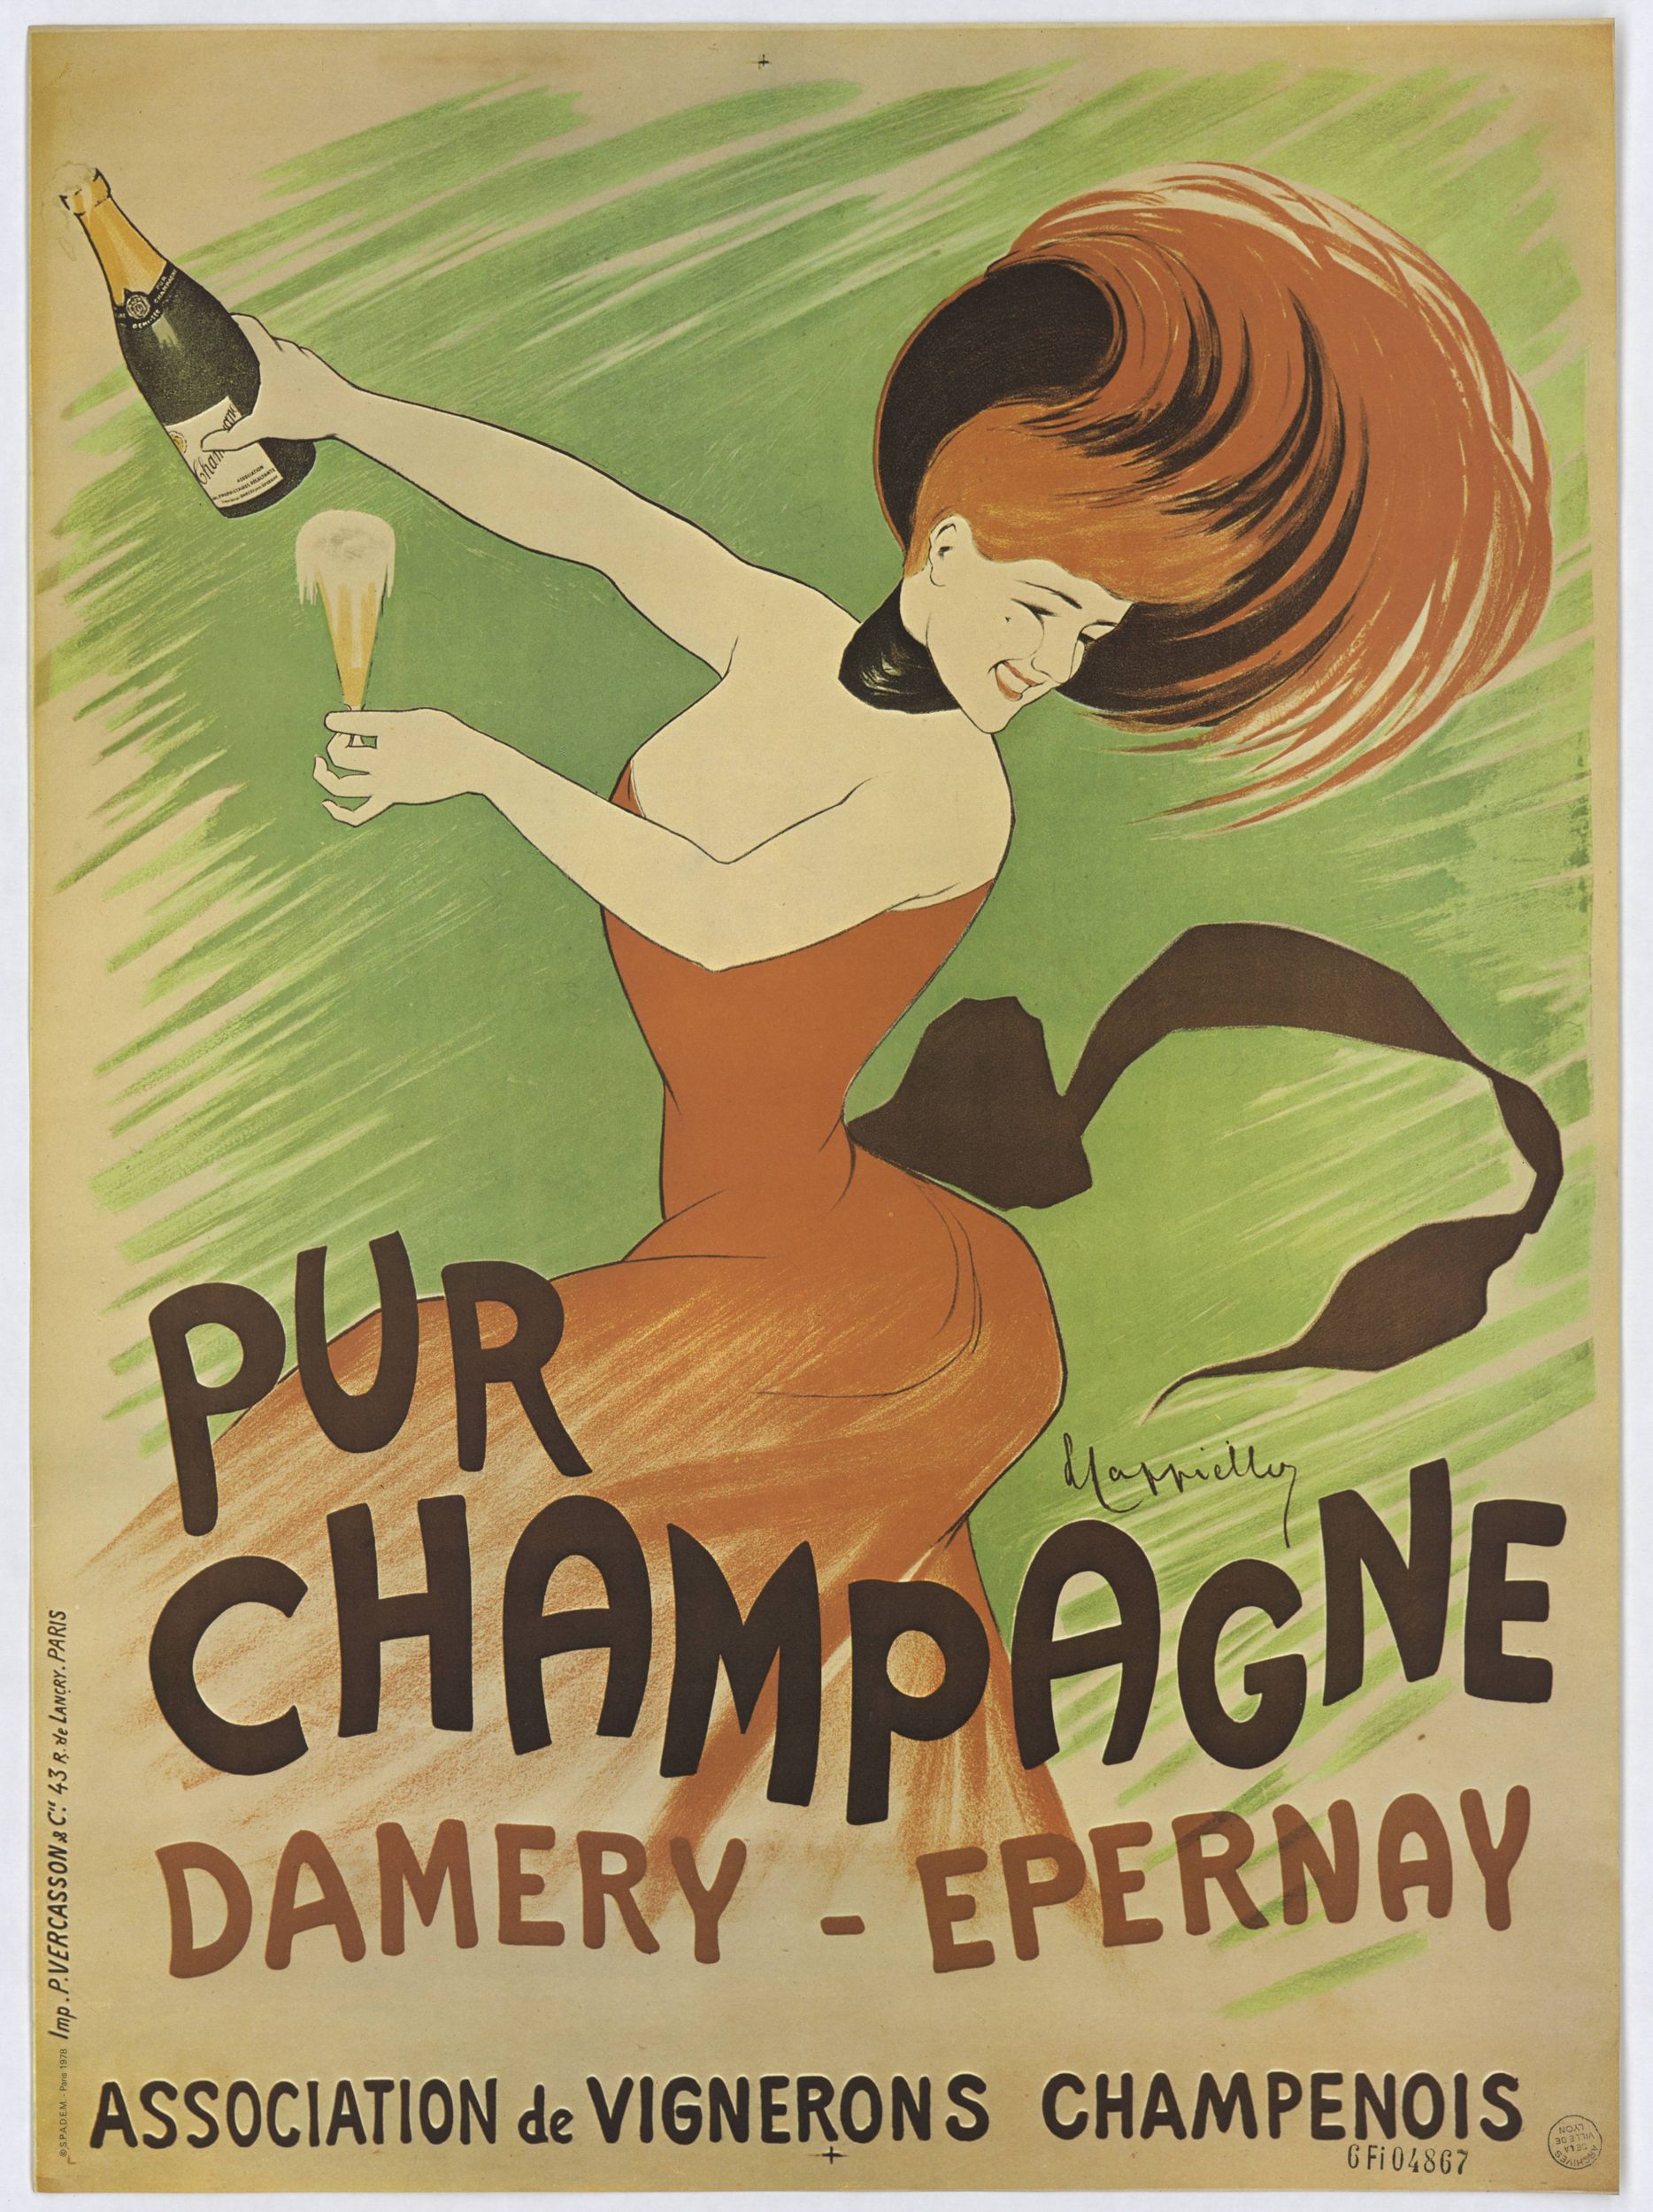 Pur champagne Damery Epernay : affiche publicitaire couleur (1902, cote : 6FI/4867)